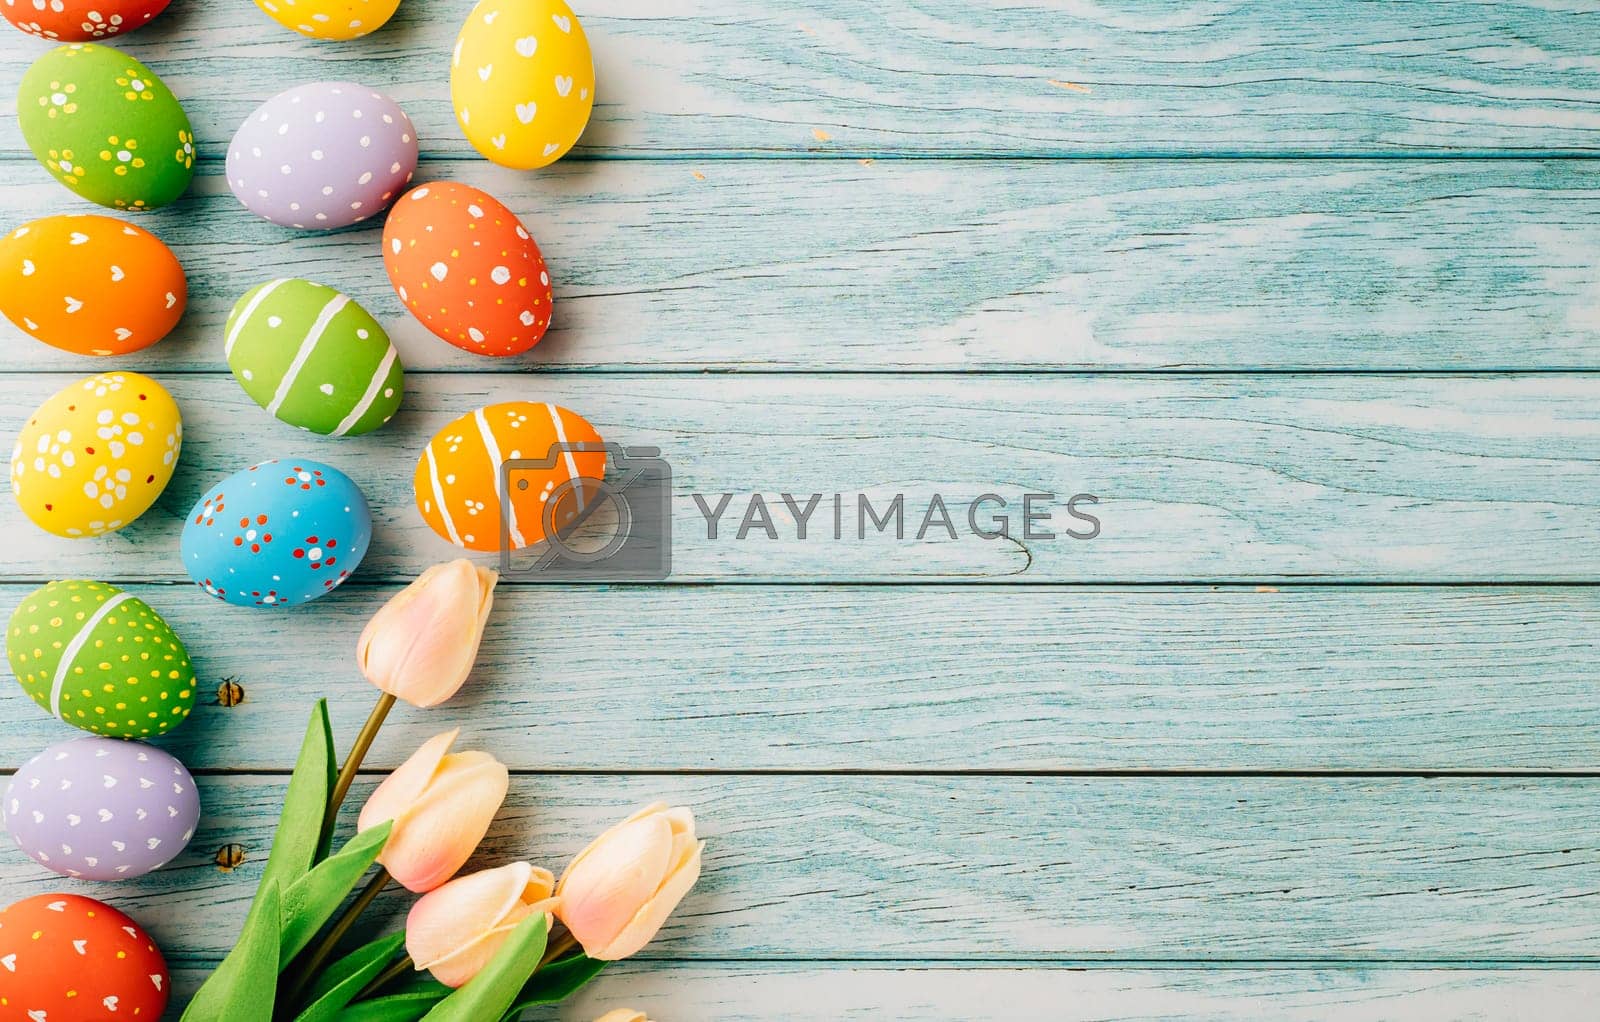 Royalty free image of Easter Day Concept by Sorapop